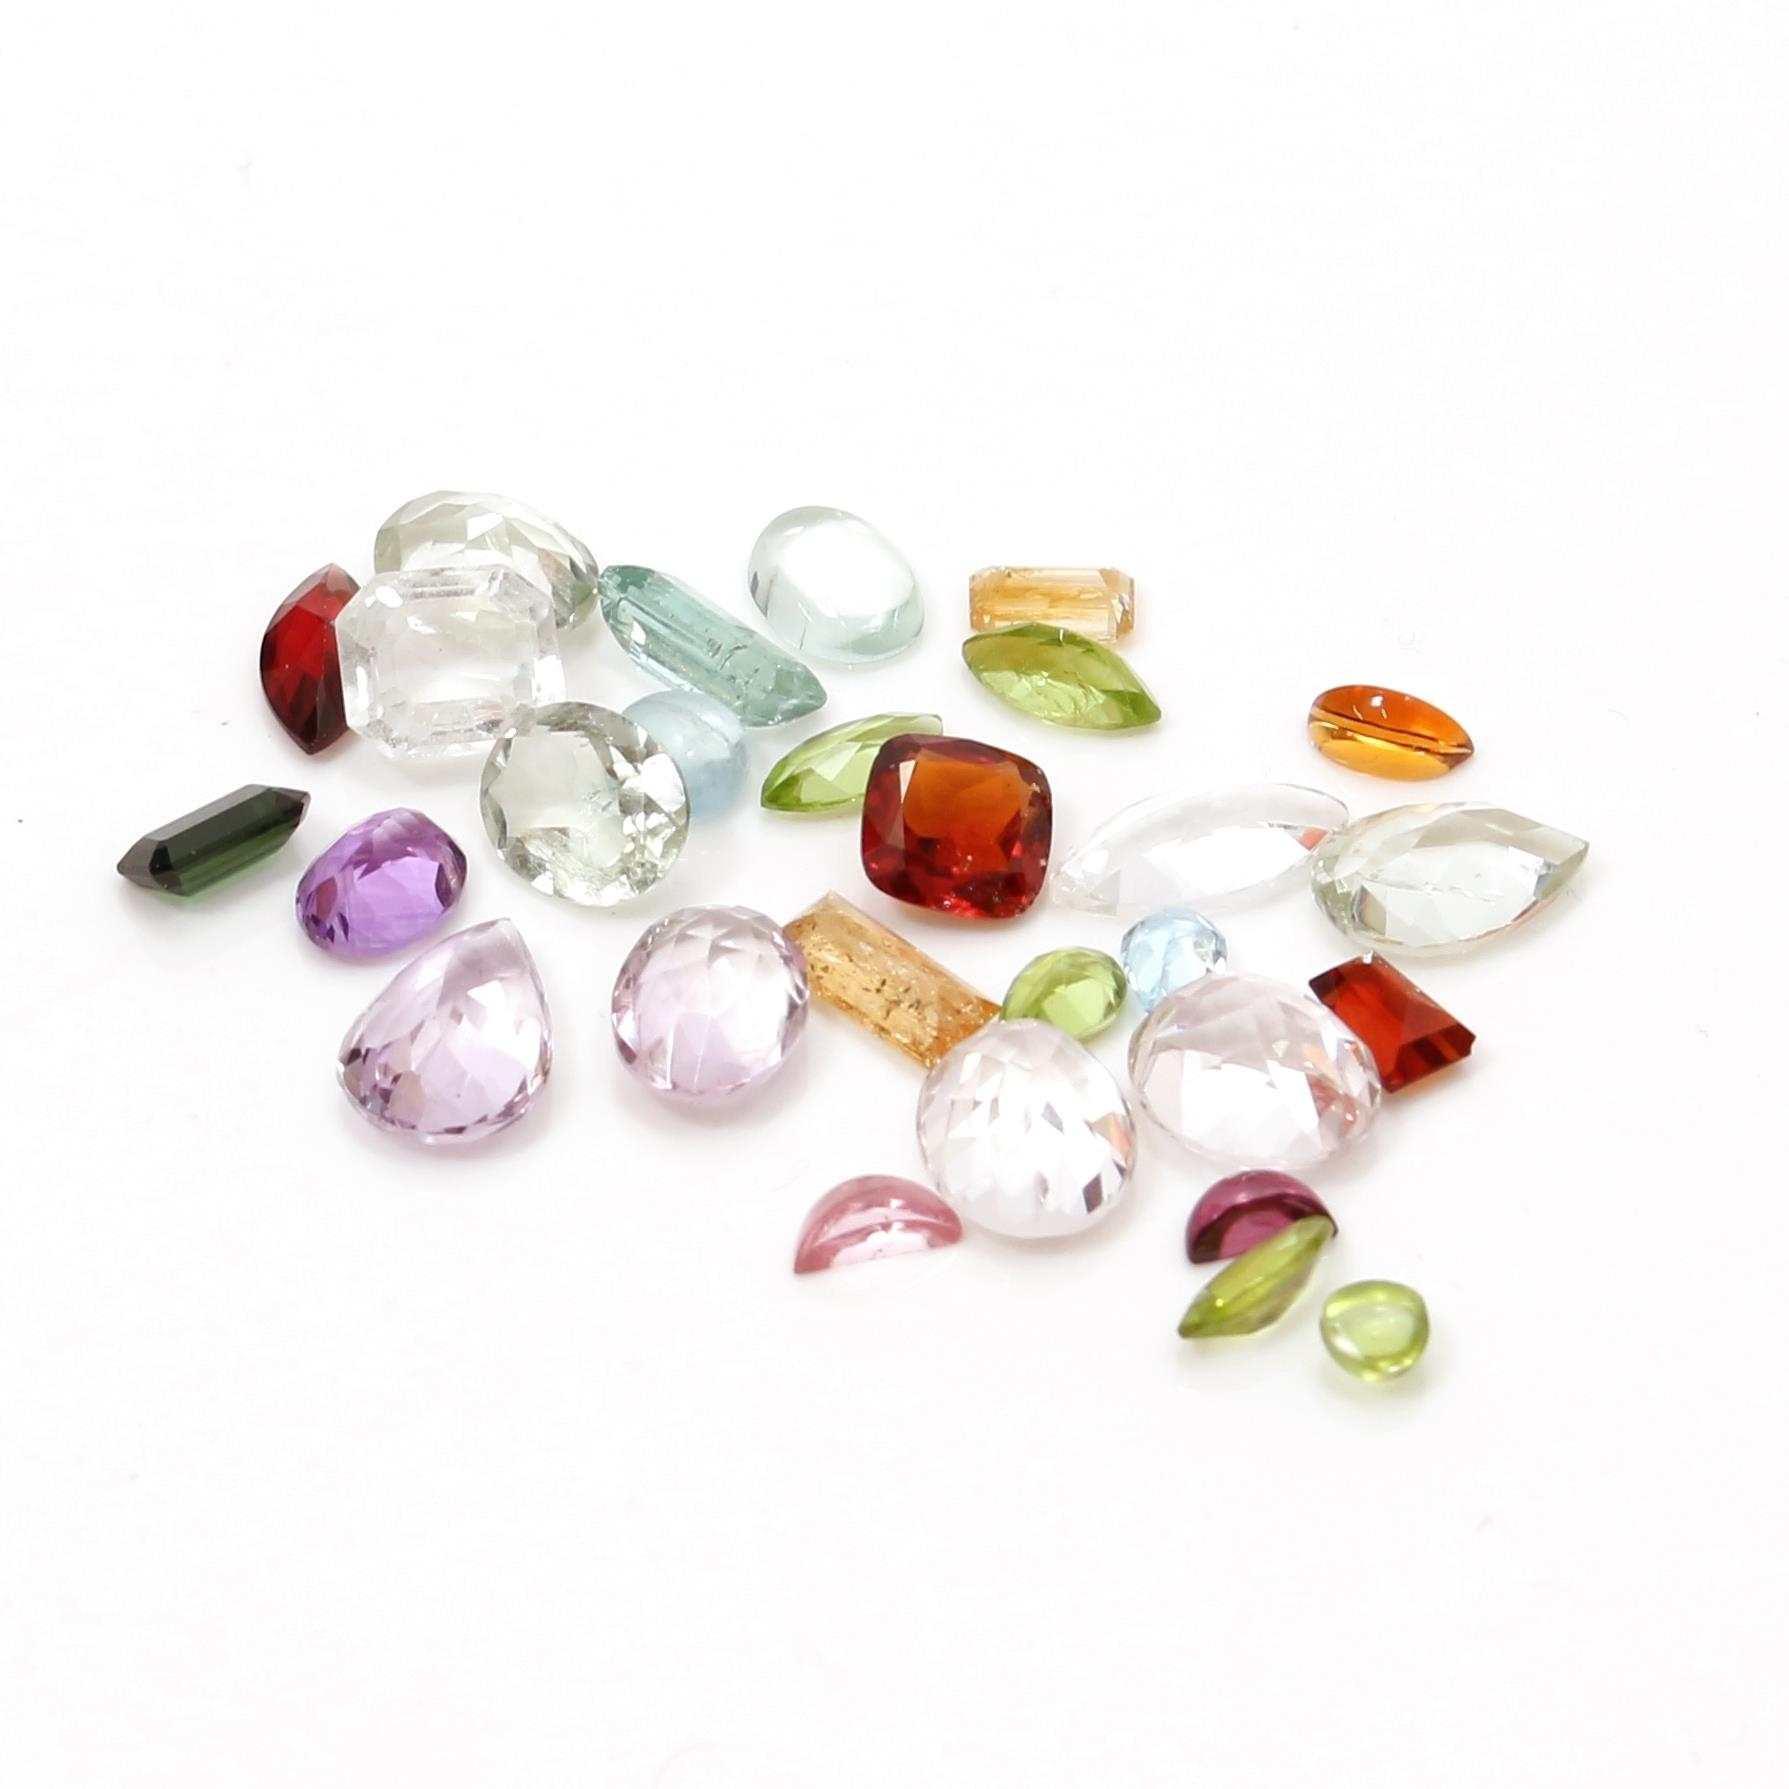 A collection of various semi-precious and glass multi-faceted gemstones and faux gemstones,